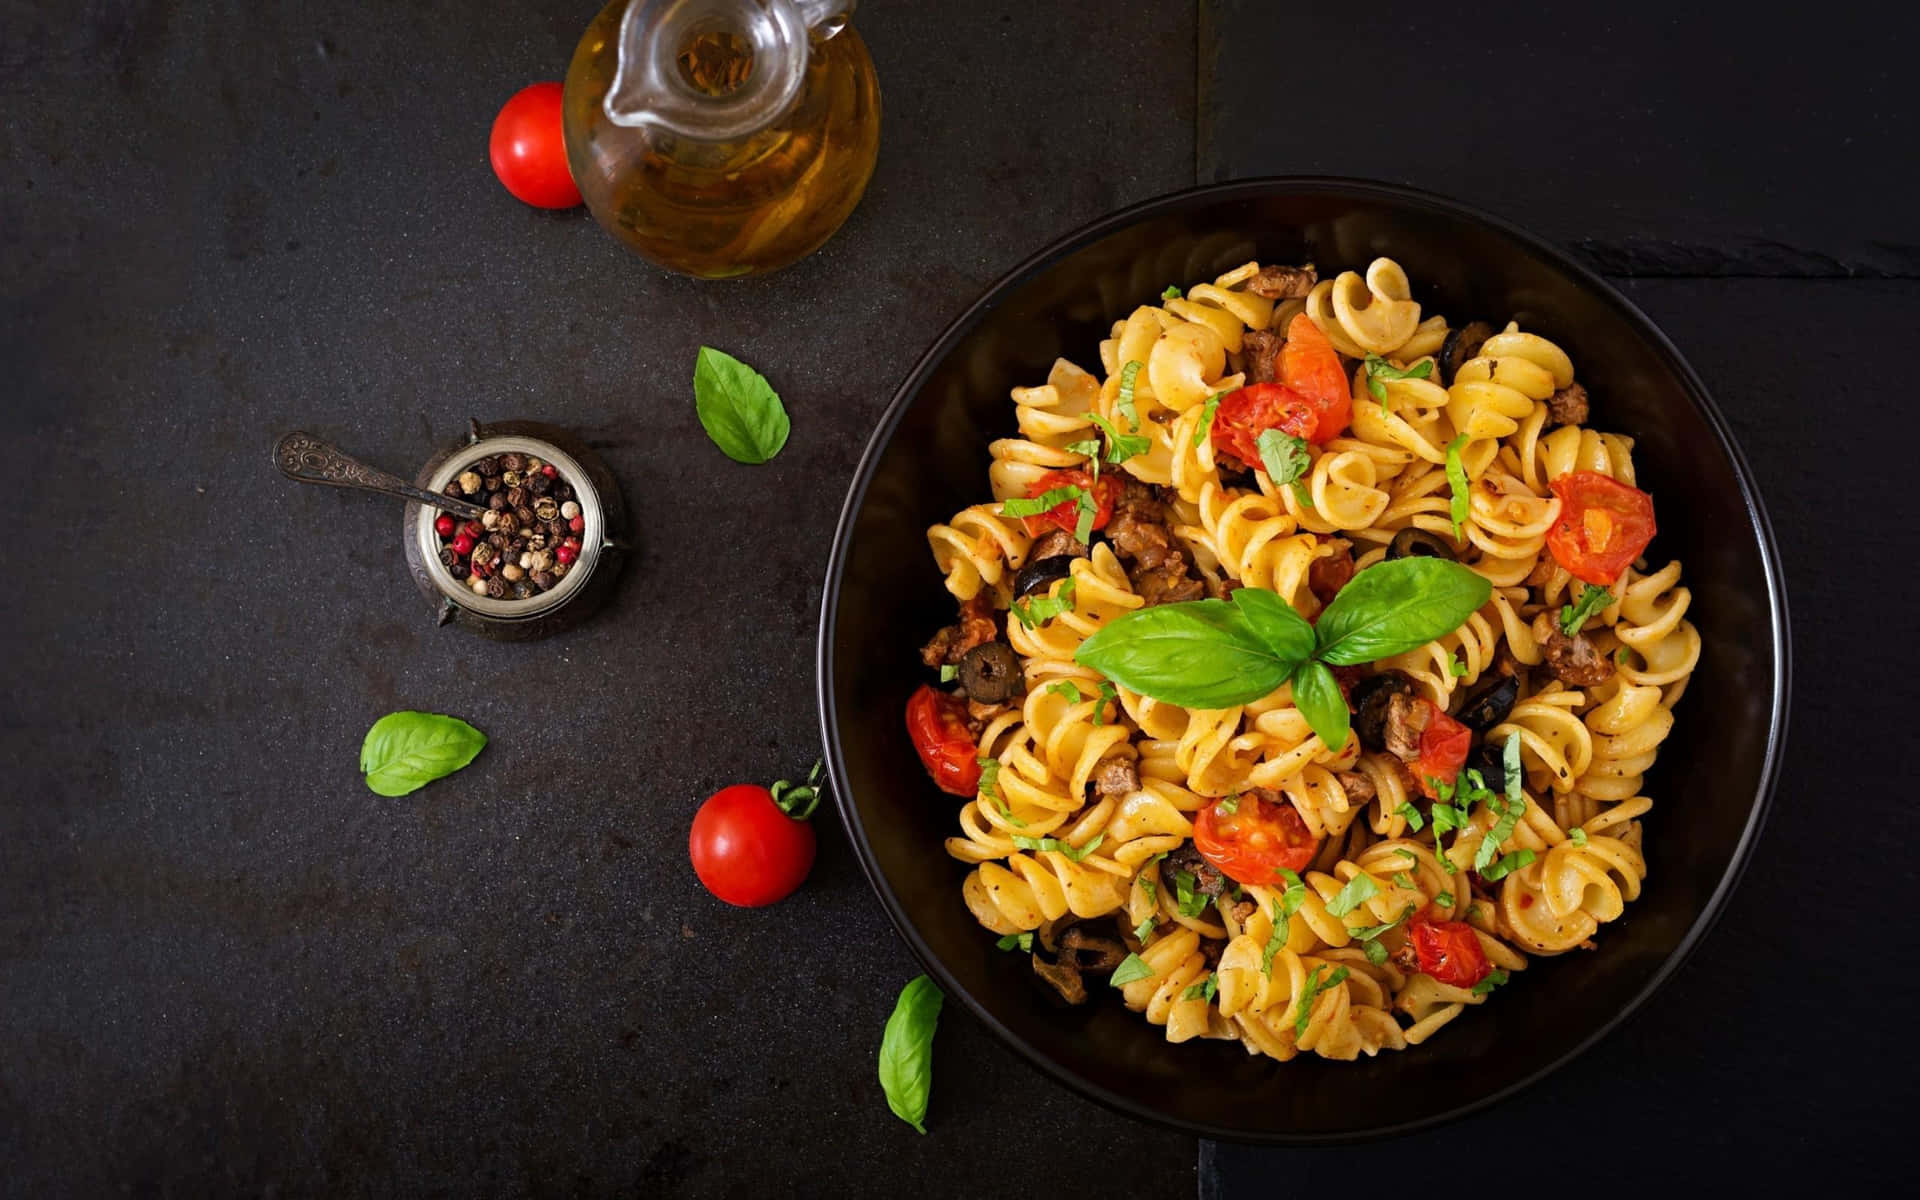 Pasta With Tomatoes And Basil On A Black Plate